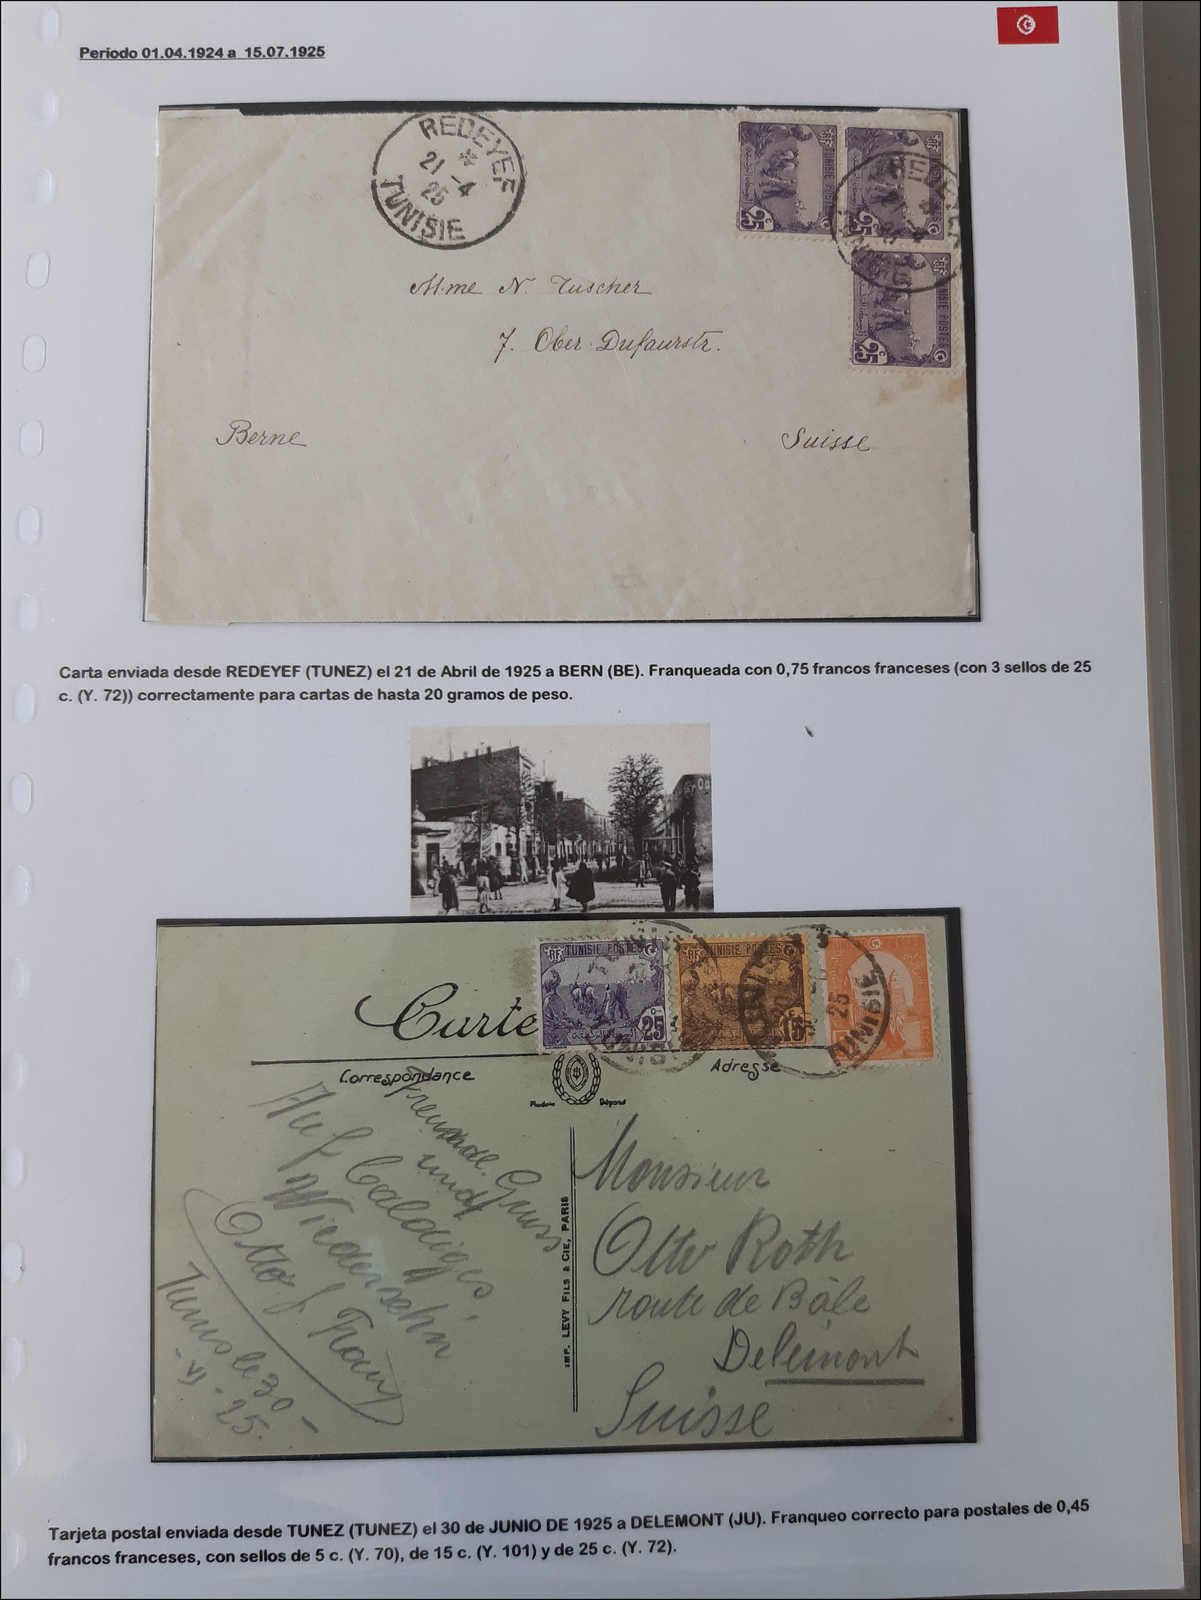 Lot 662 - andere gebiete tunesien -  Rolli Auctions Auction #68 Day 1